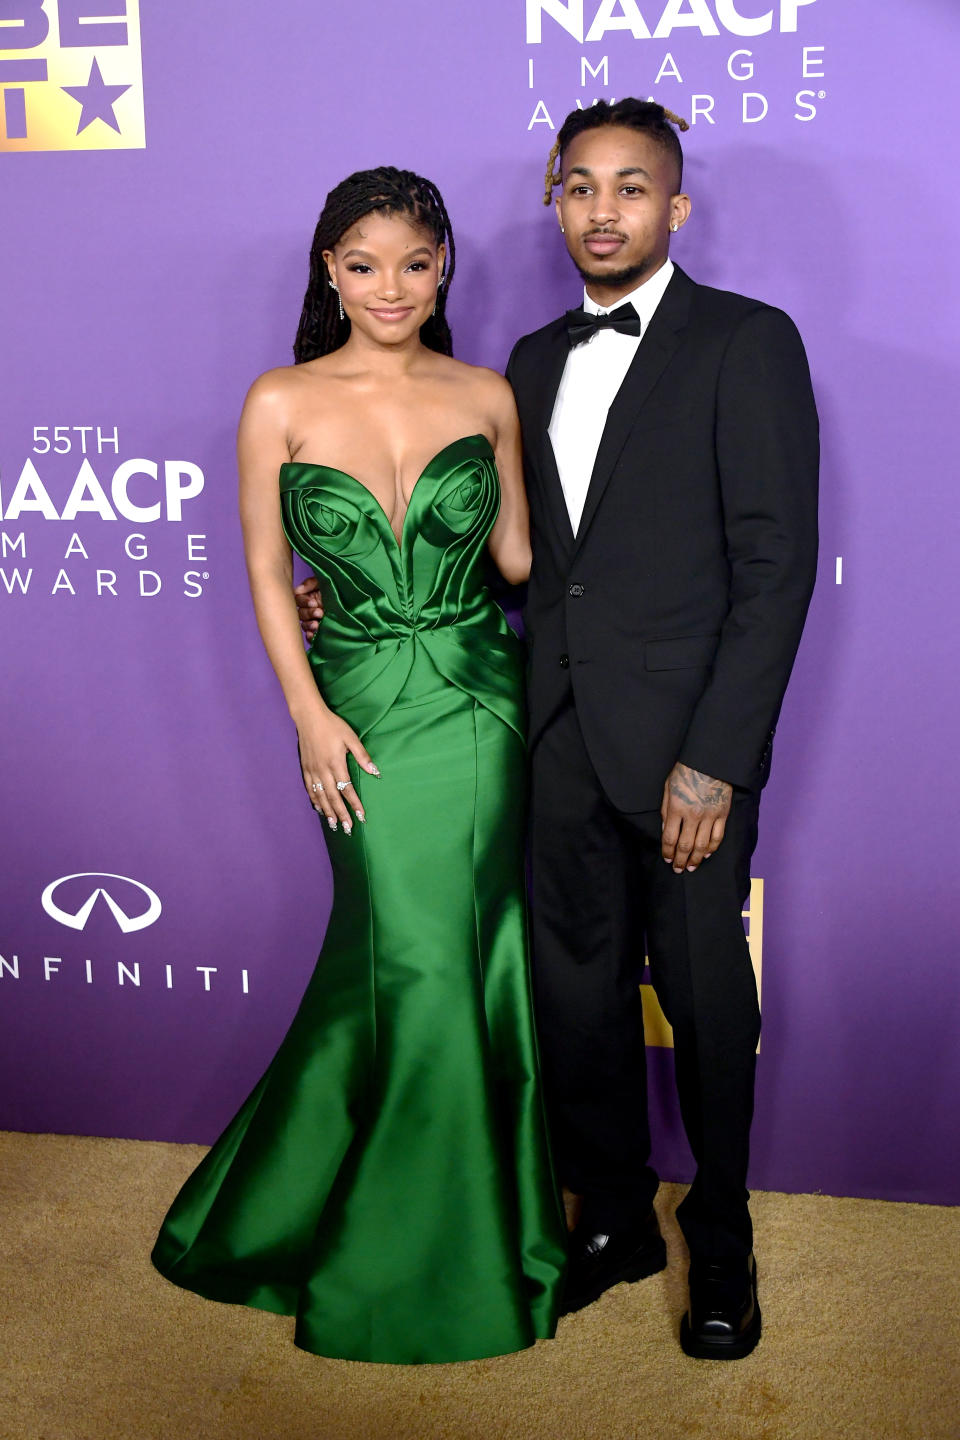 LOS ANGELES, CALIFORNIA - MARCH 16: (L-R) Halle Bailey and DDG attends the 55th Annual NAACP Awards at Shrine Auditorium and Expo Hall on March 16, 2024 in Los Angeles, California. (Photo by Unique Nicole/WireImage)